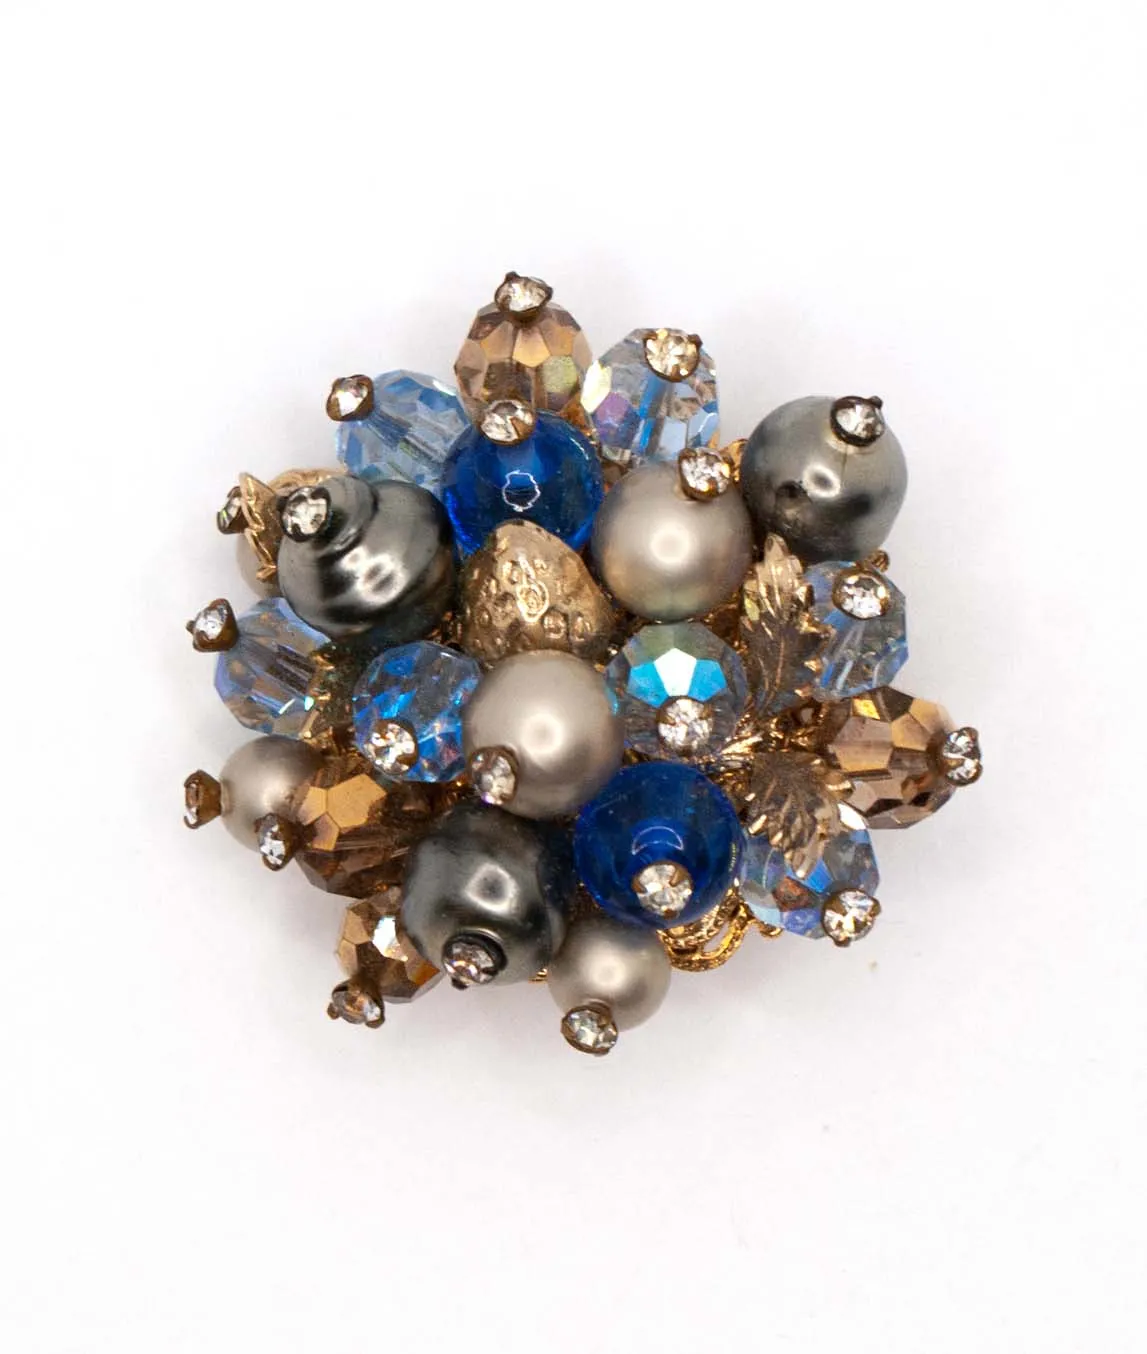 Vintage Vendôme brooch constructed from gold painted and blue faceted beads with rhinestones